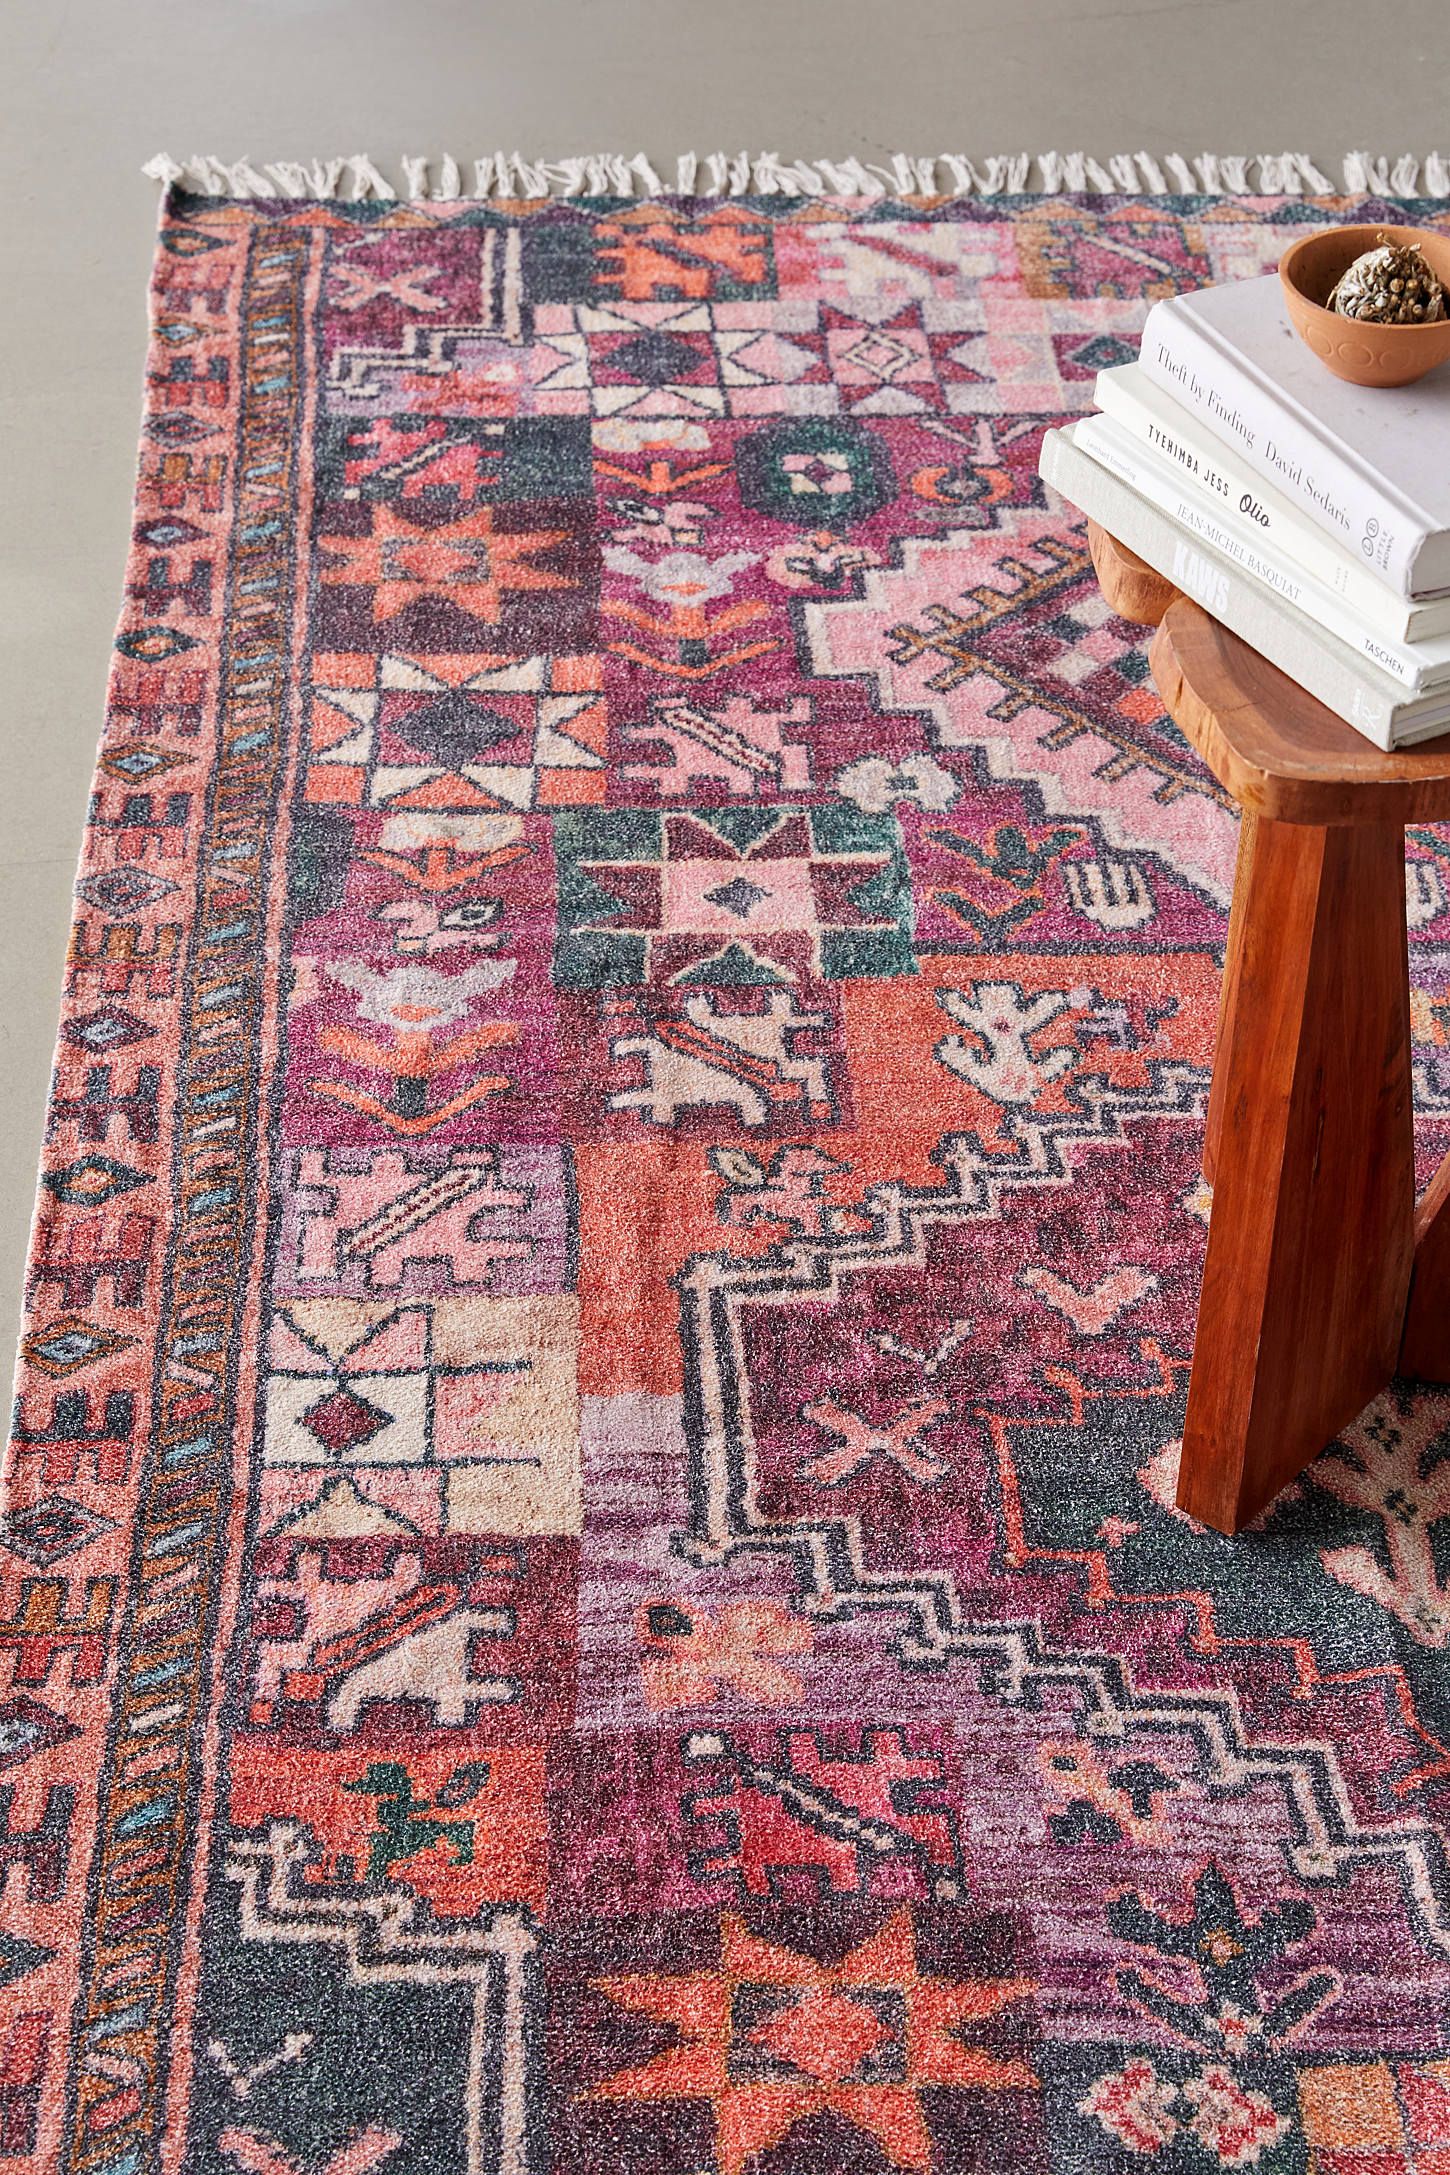 IKEA Rugs (12 Things You Should Know Before & After Buying)